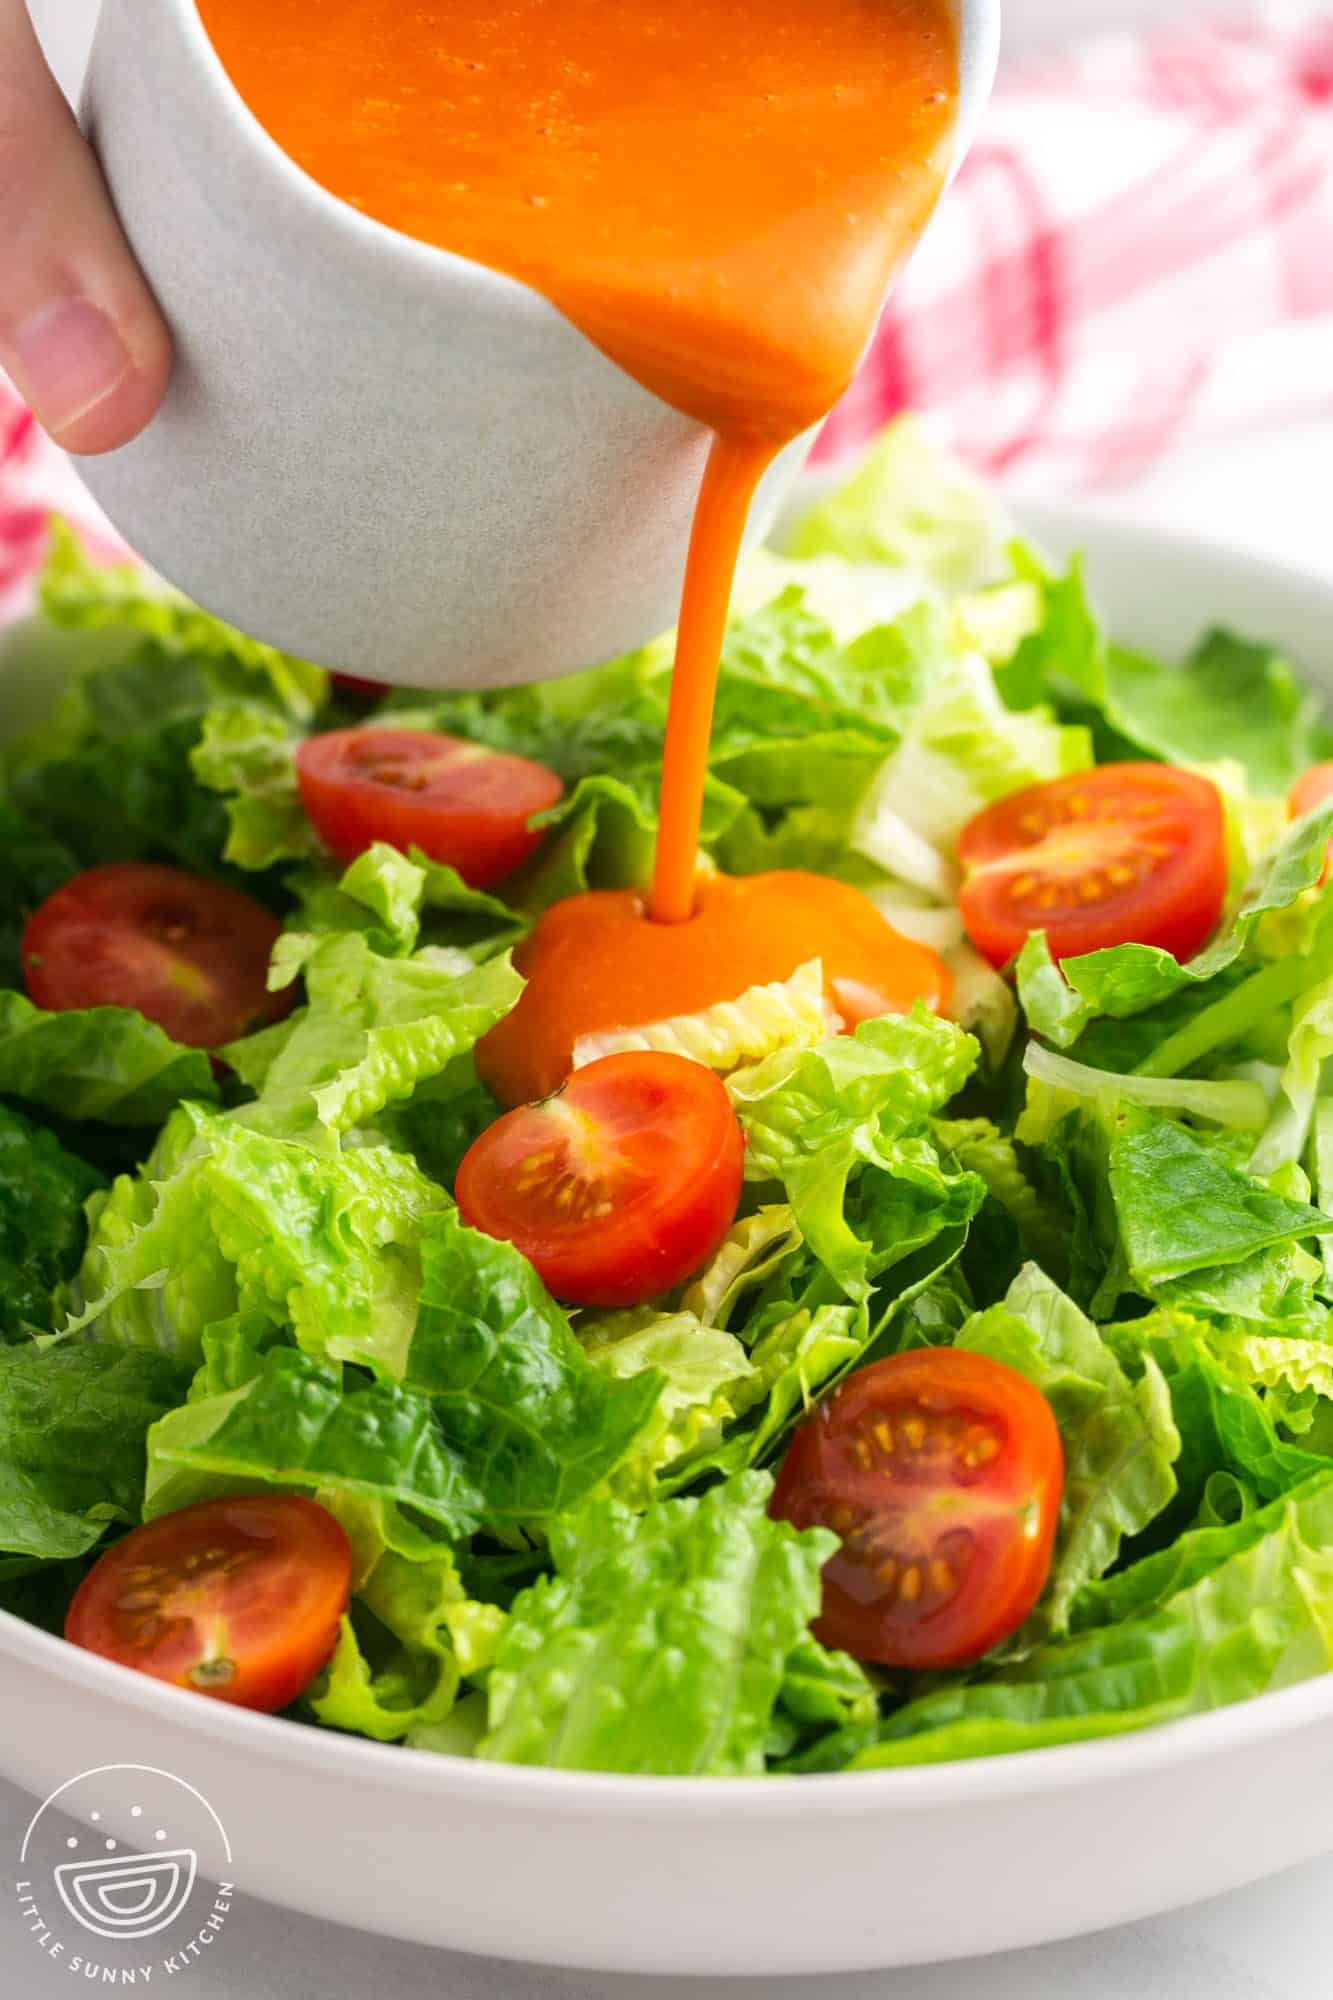 Pouring Catalina dressing over a simple salad of leafy greens and cherry tomatoes